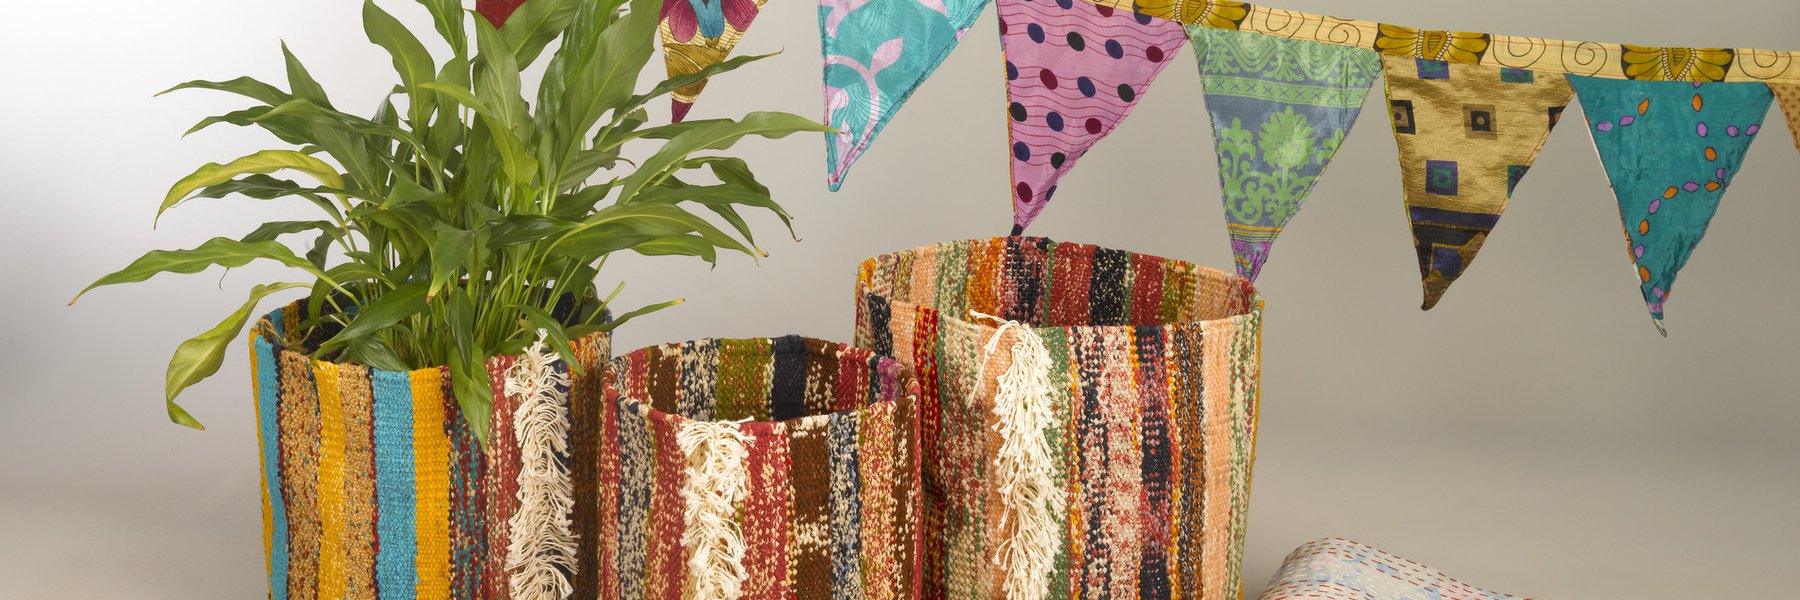 A selection of colourful baskets and bunting made from recycled saris